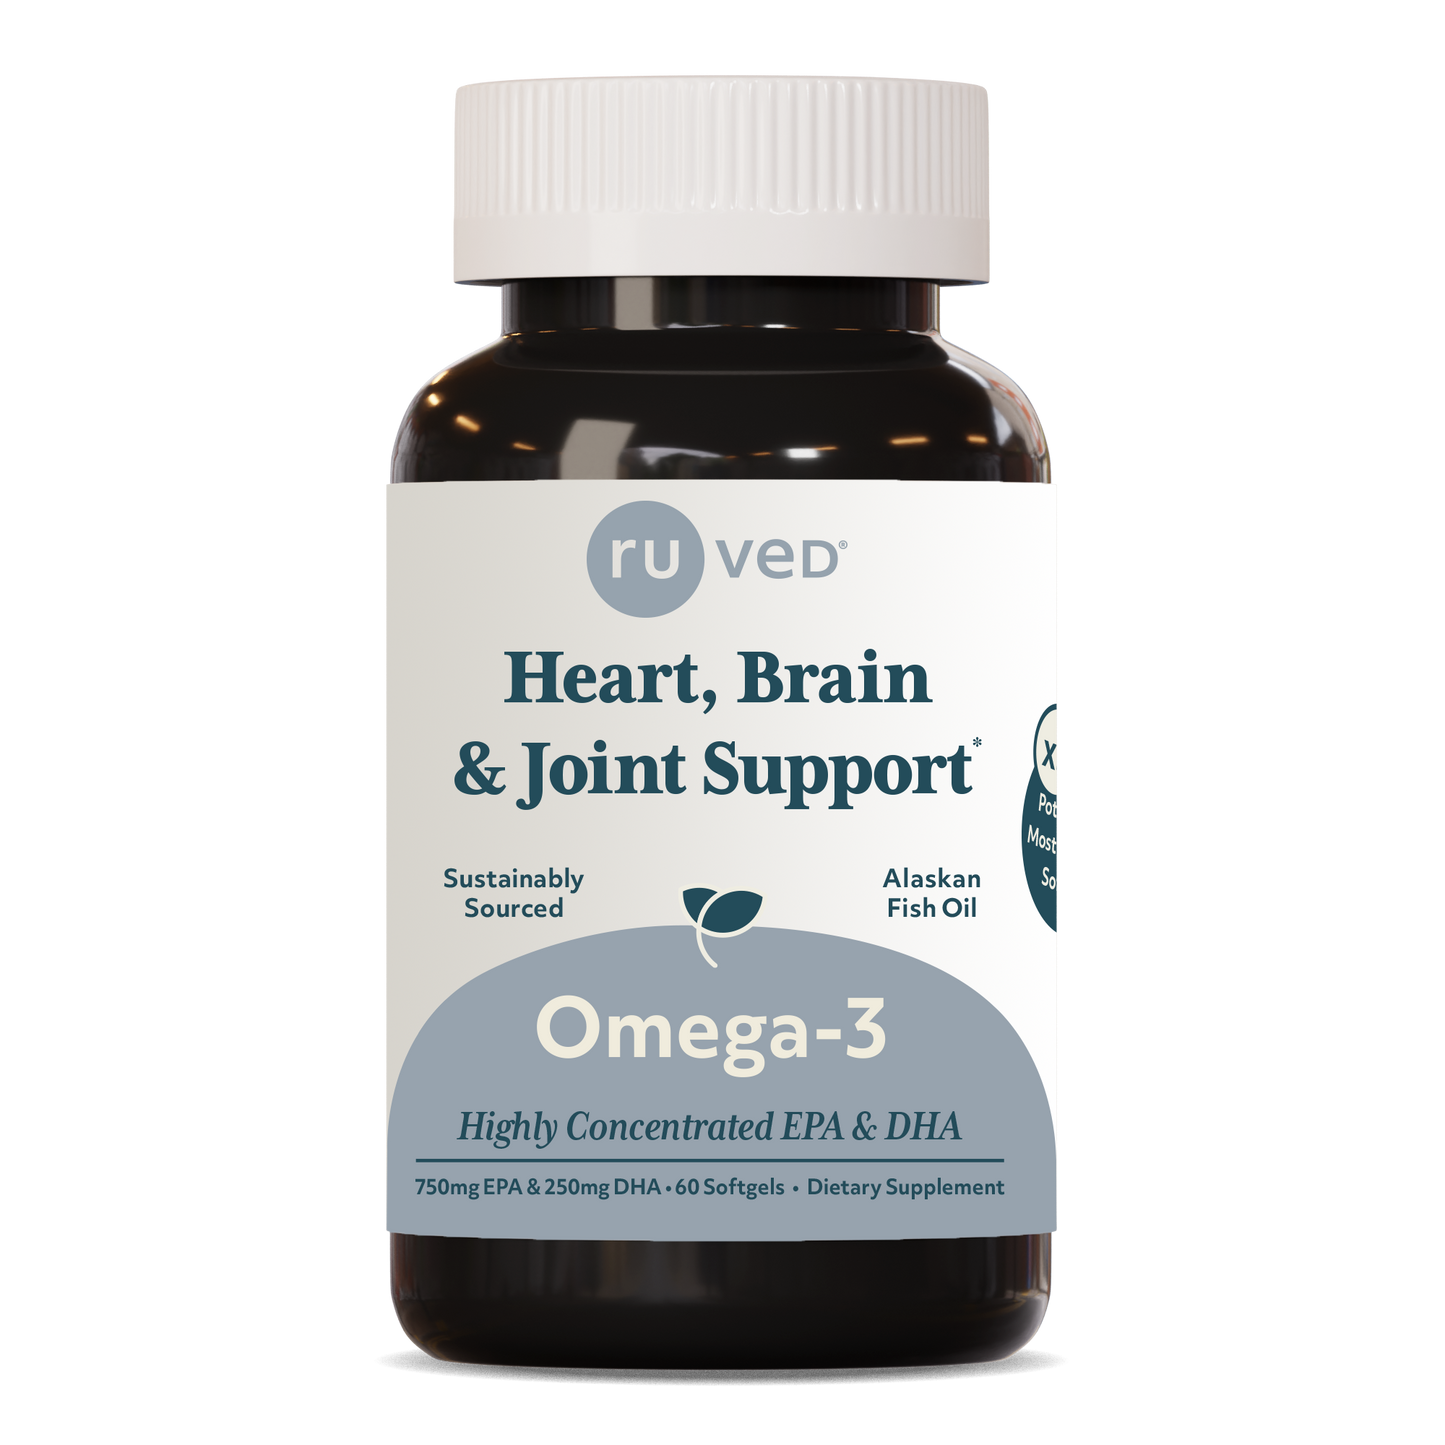 Omega-3 Pure and Potent Omega 3 for Daily Wellness, Nutrients for Brain, Joint and Cardiovascular Health by ruved herbal supplements and ayush herbs